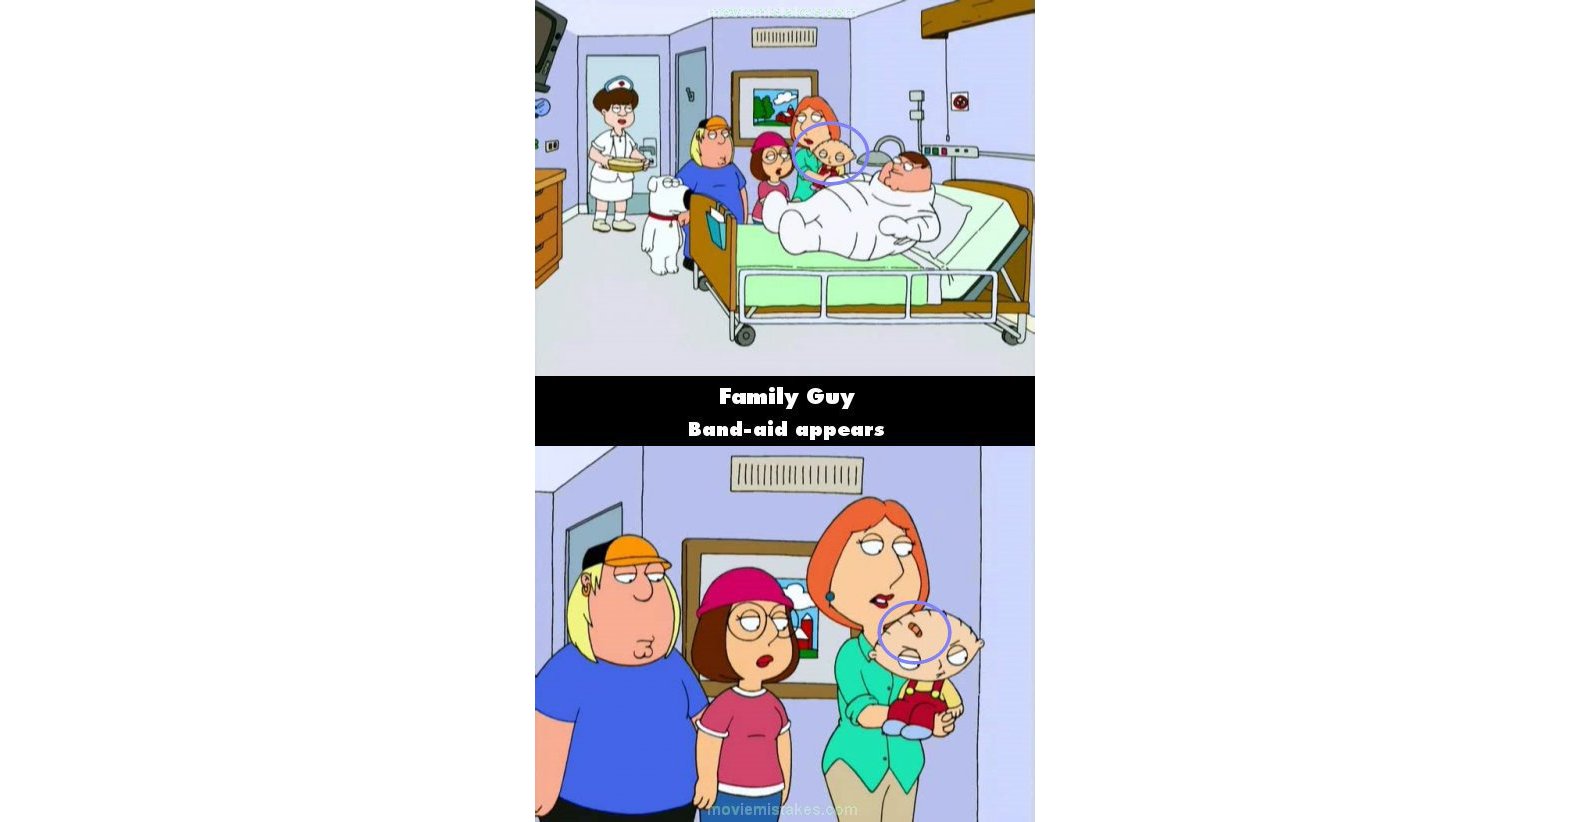 Family Guy (1999) TV mistake picture (ID 72193)